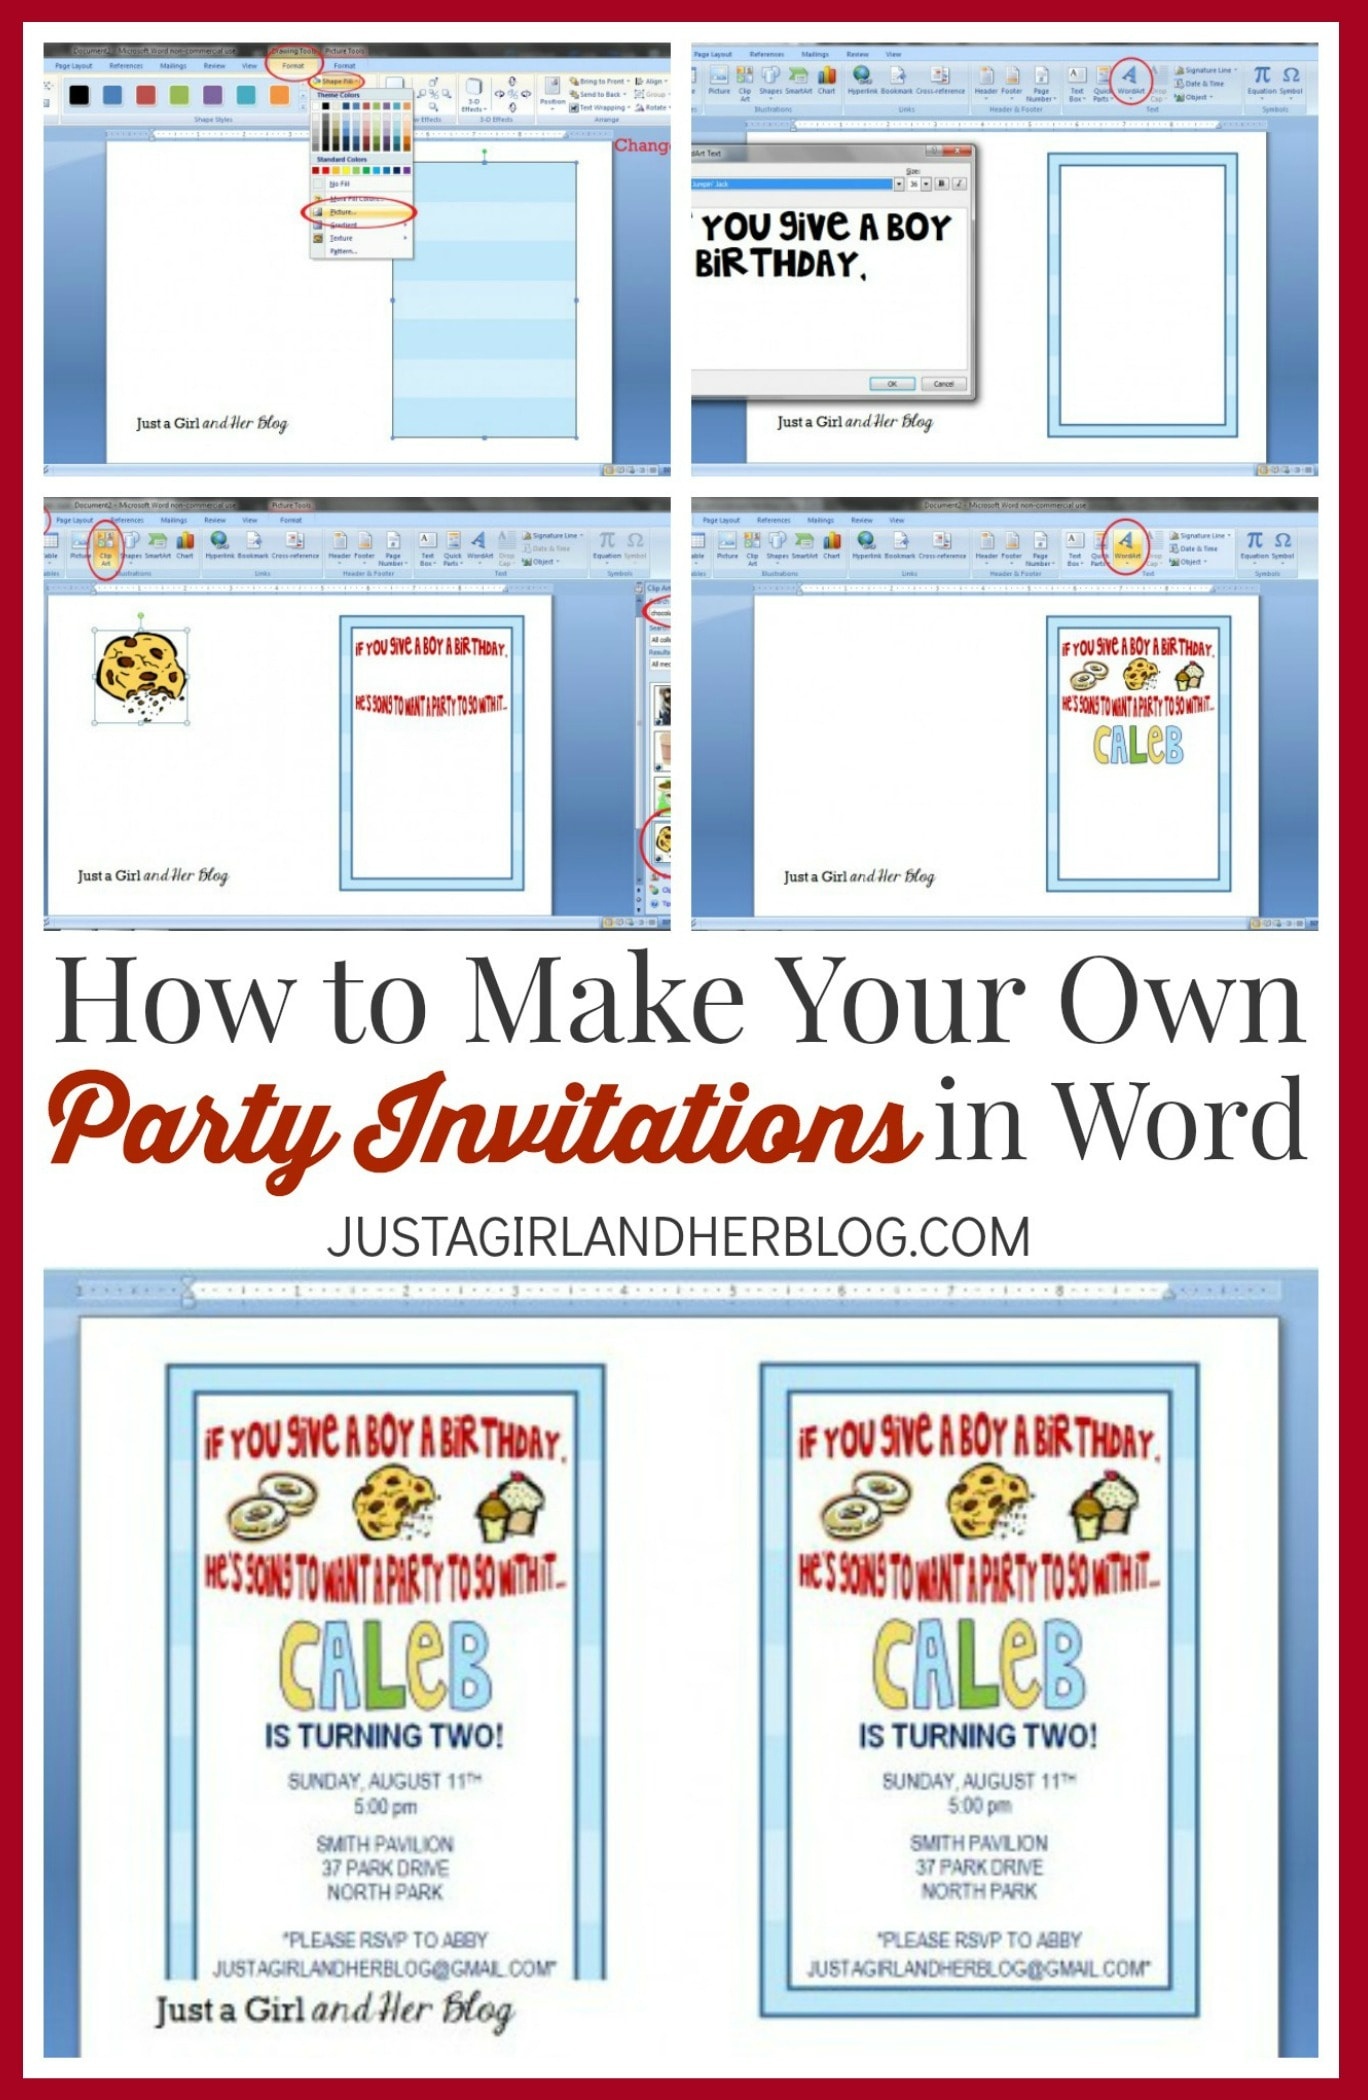 How To Make Your Own Party Invitations | Abby Lawson - Play Date Invitations Free Printable